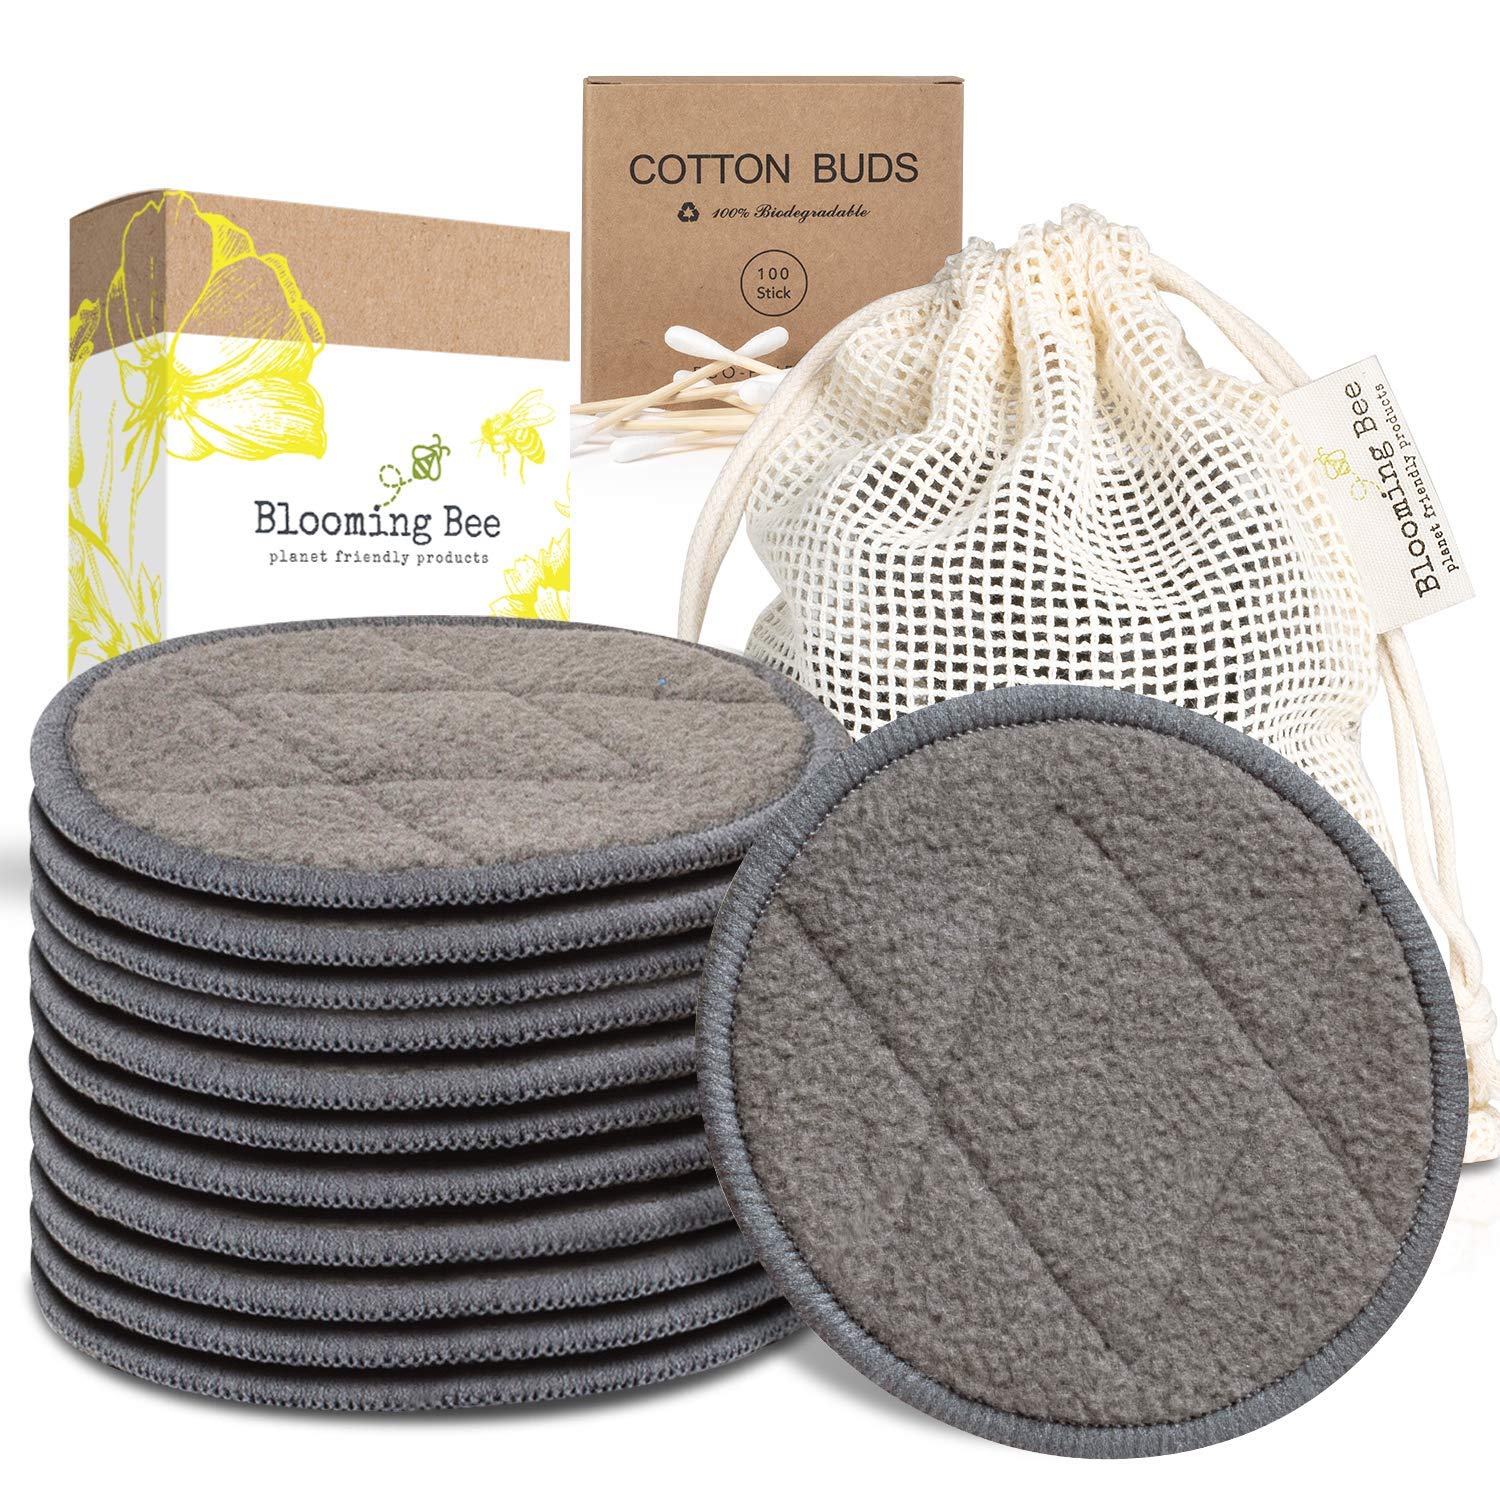 Reusable Cotton Rounds With Pockets 100% Organic Cotton Charcoal Infused  for Applying Toner Makeup Remover Daily Cleansing Travel-friendly 